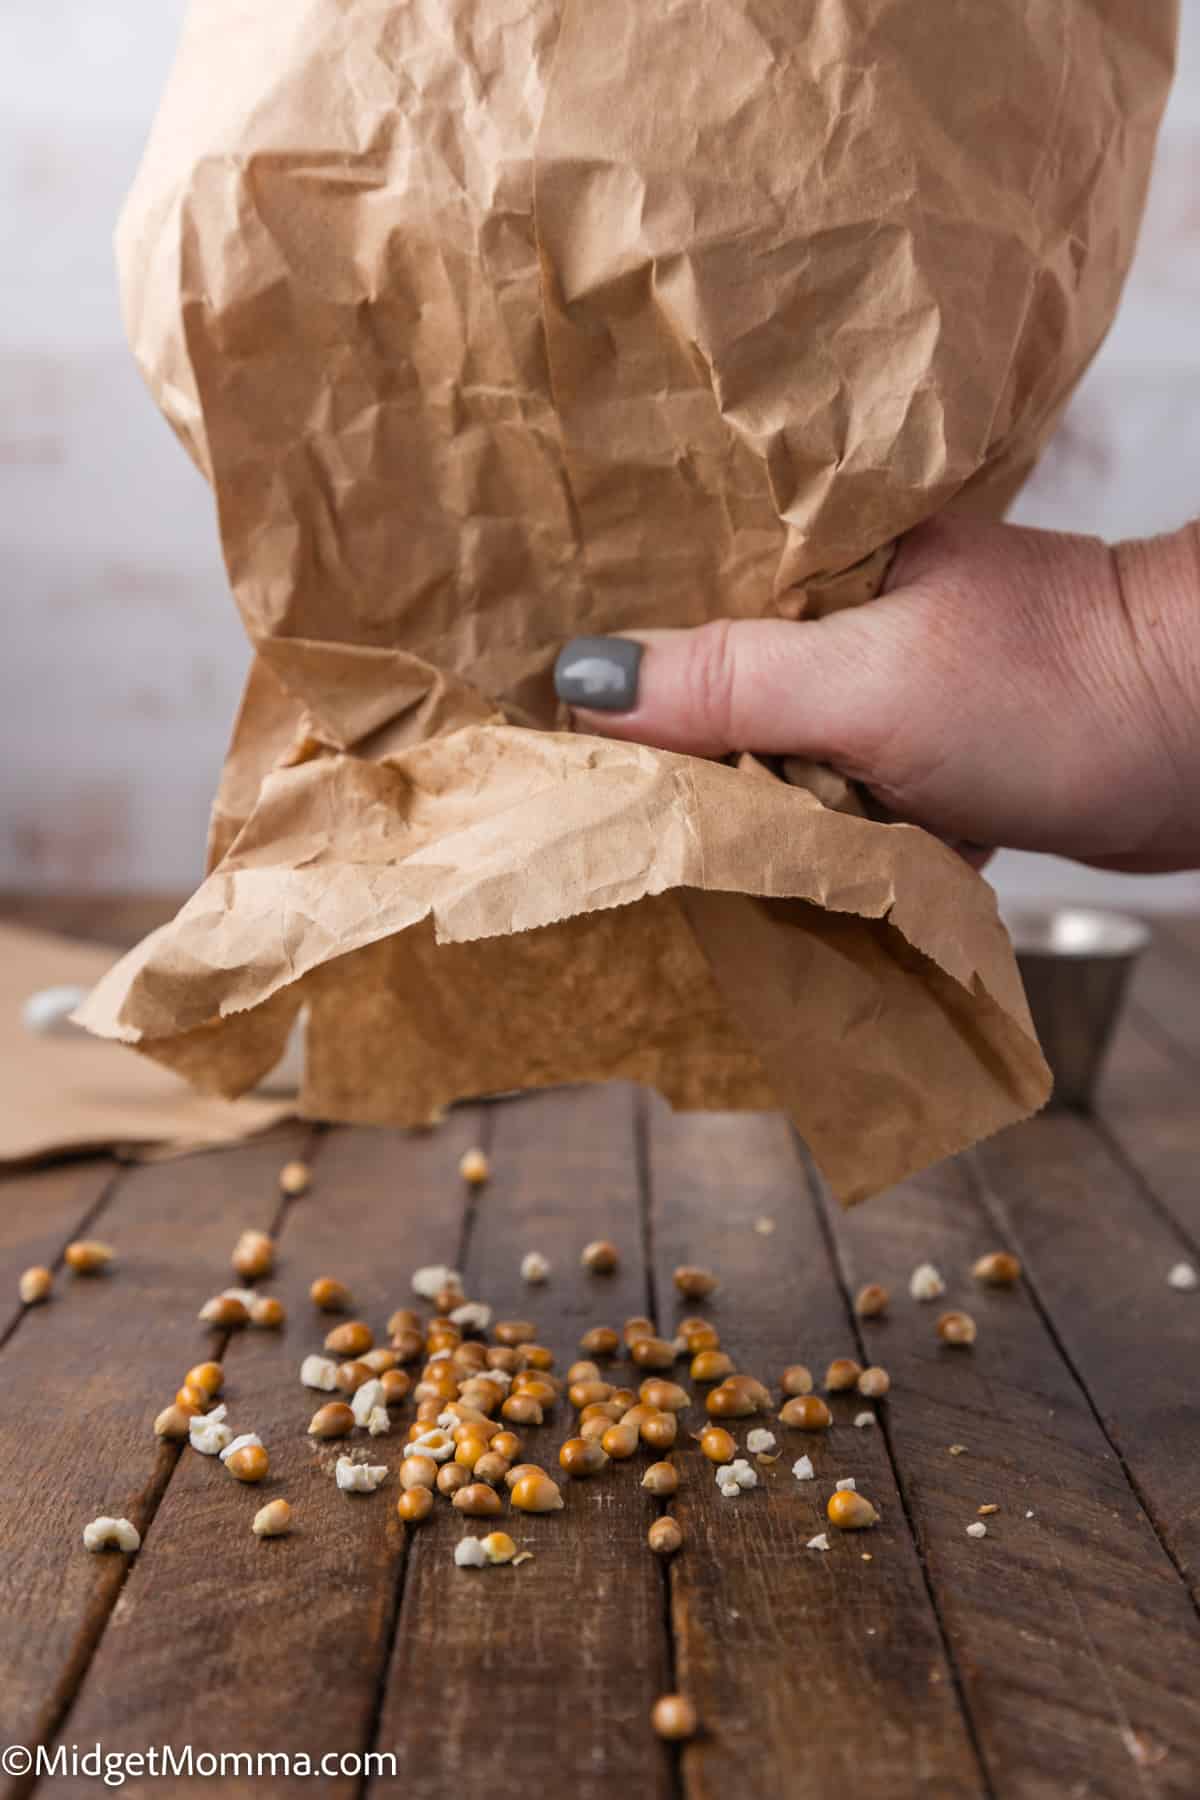 A hand tipping a paper bag and spilling popcorn kernels onto a wooden surface.